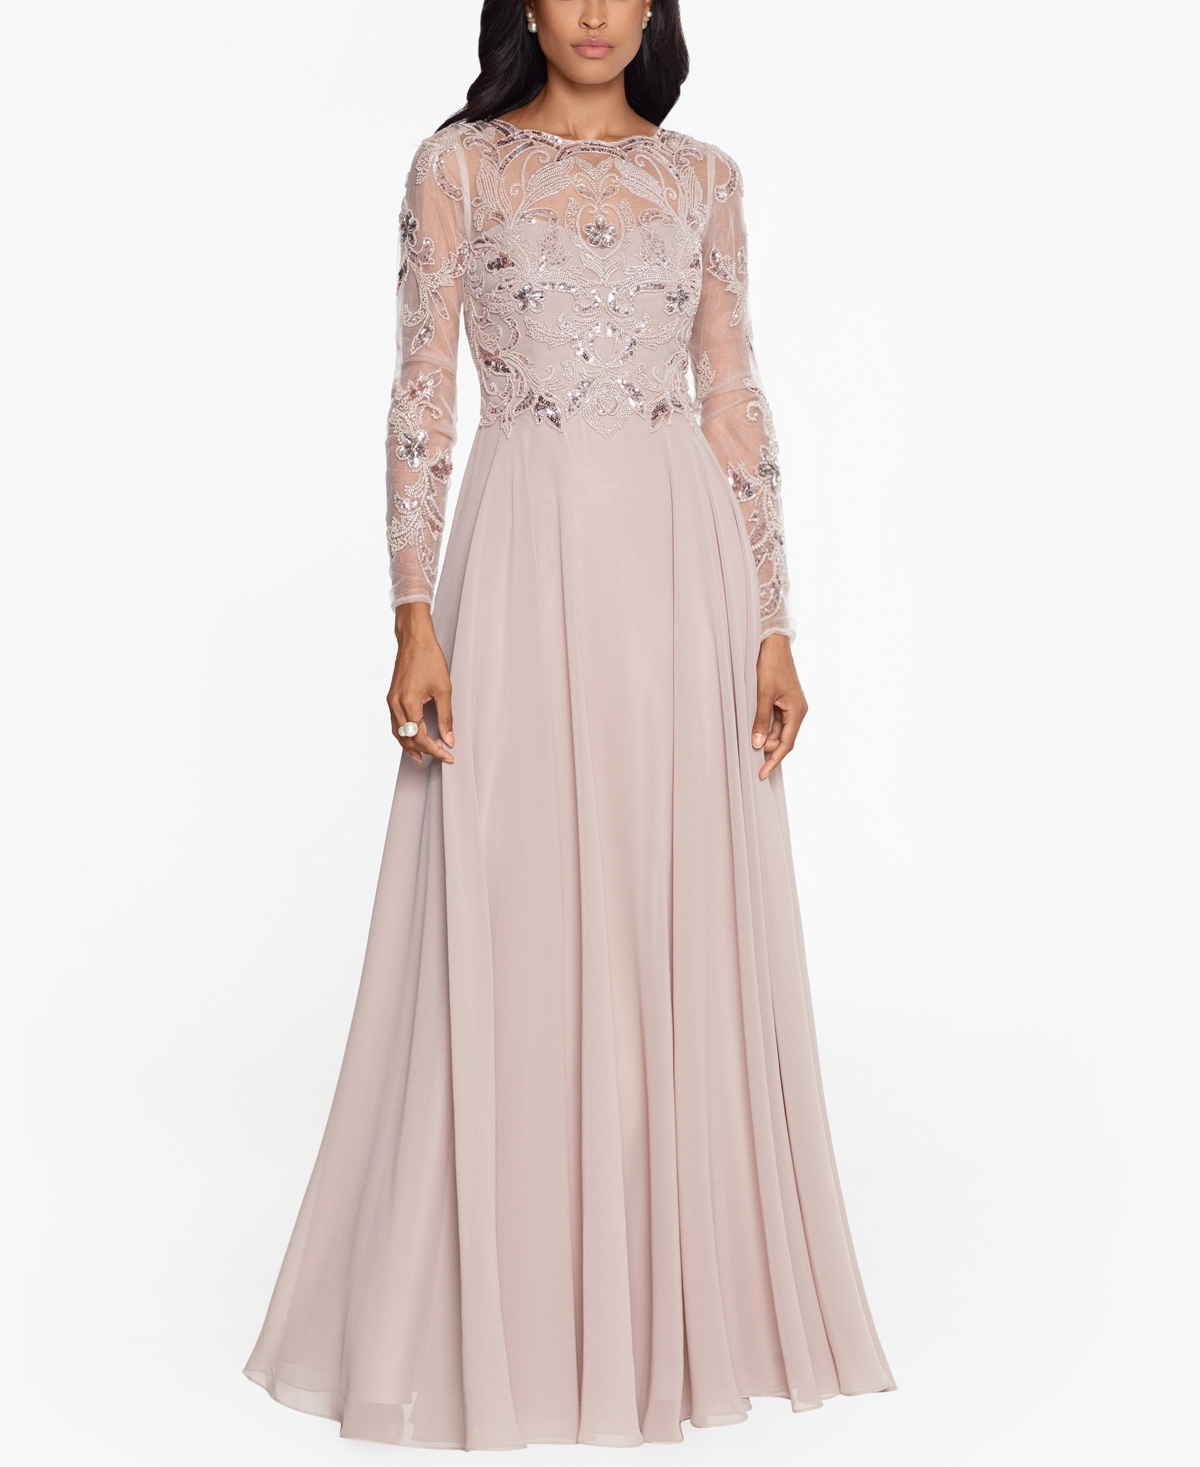 Petite Mesh-Sleeve Embellished Gown - Taupe